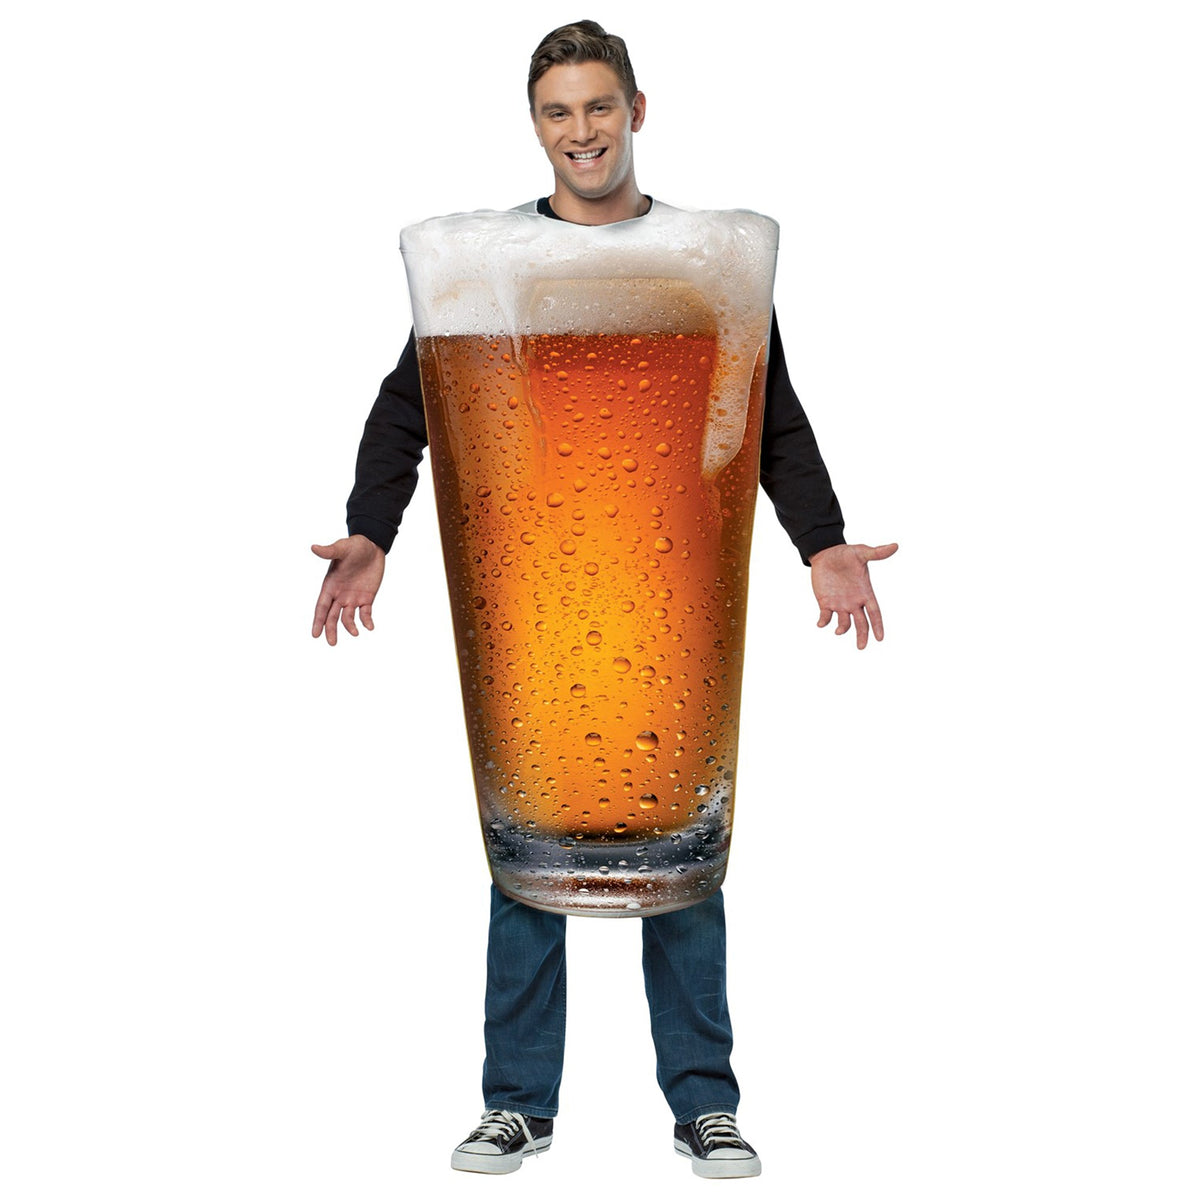 RASTA IMPOSTA PRODUCTS Costumes Get Real Beer Pint Costume for Adults 791249680305